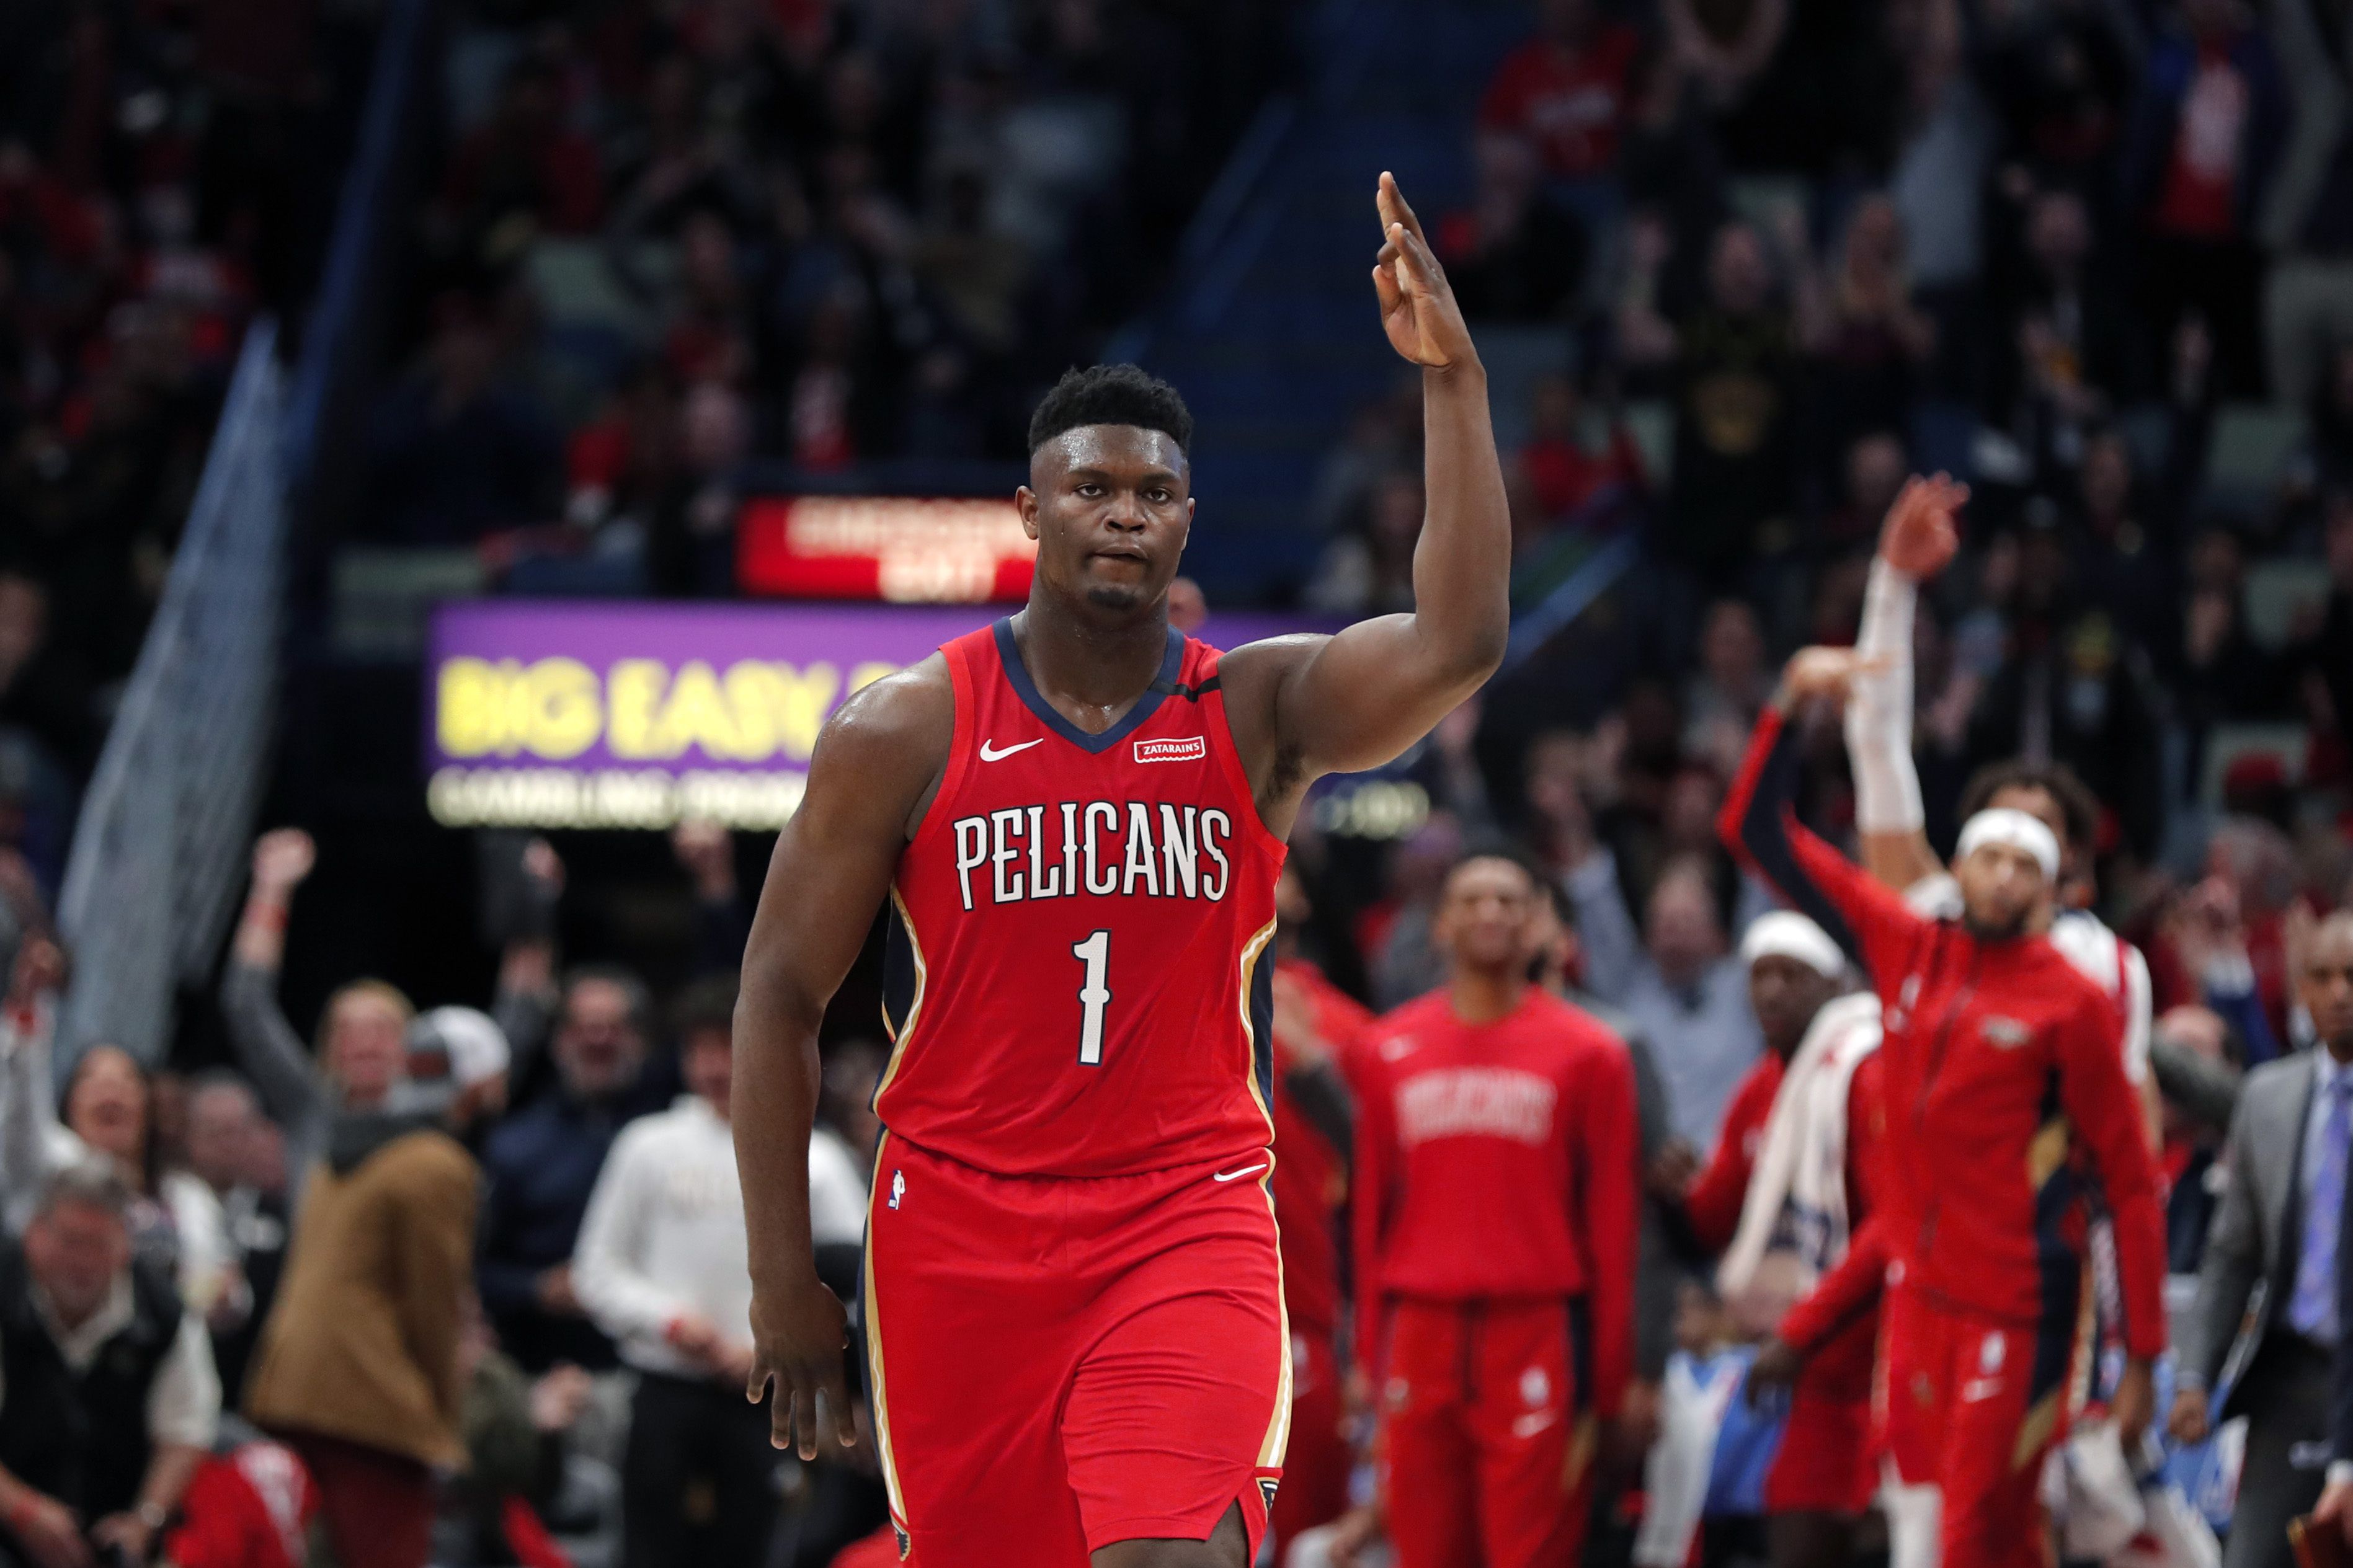 Pelicans: Brandon Ingram ready to carry team without Zion Williamson